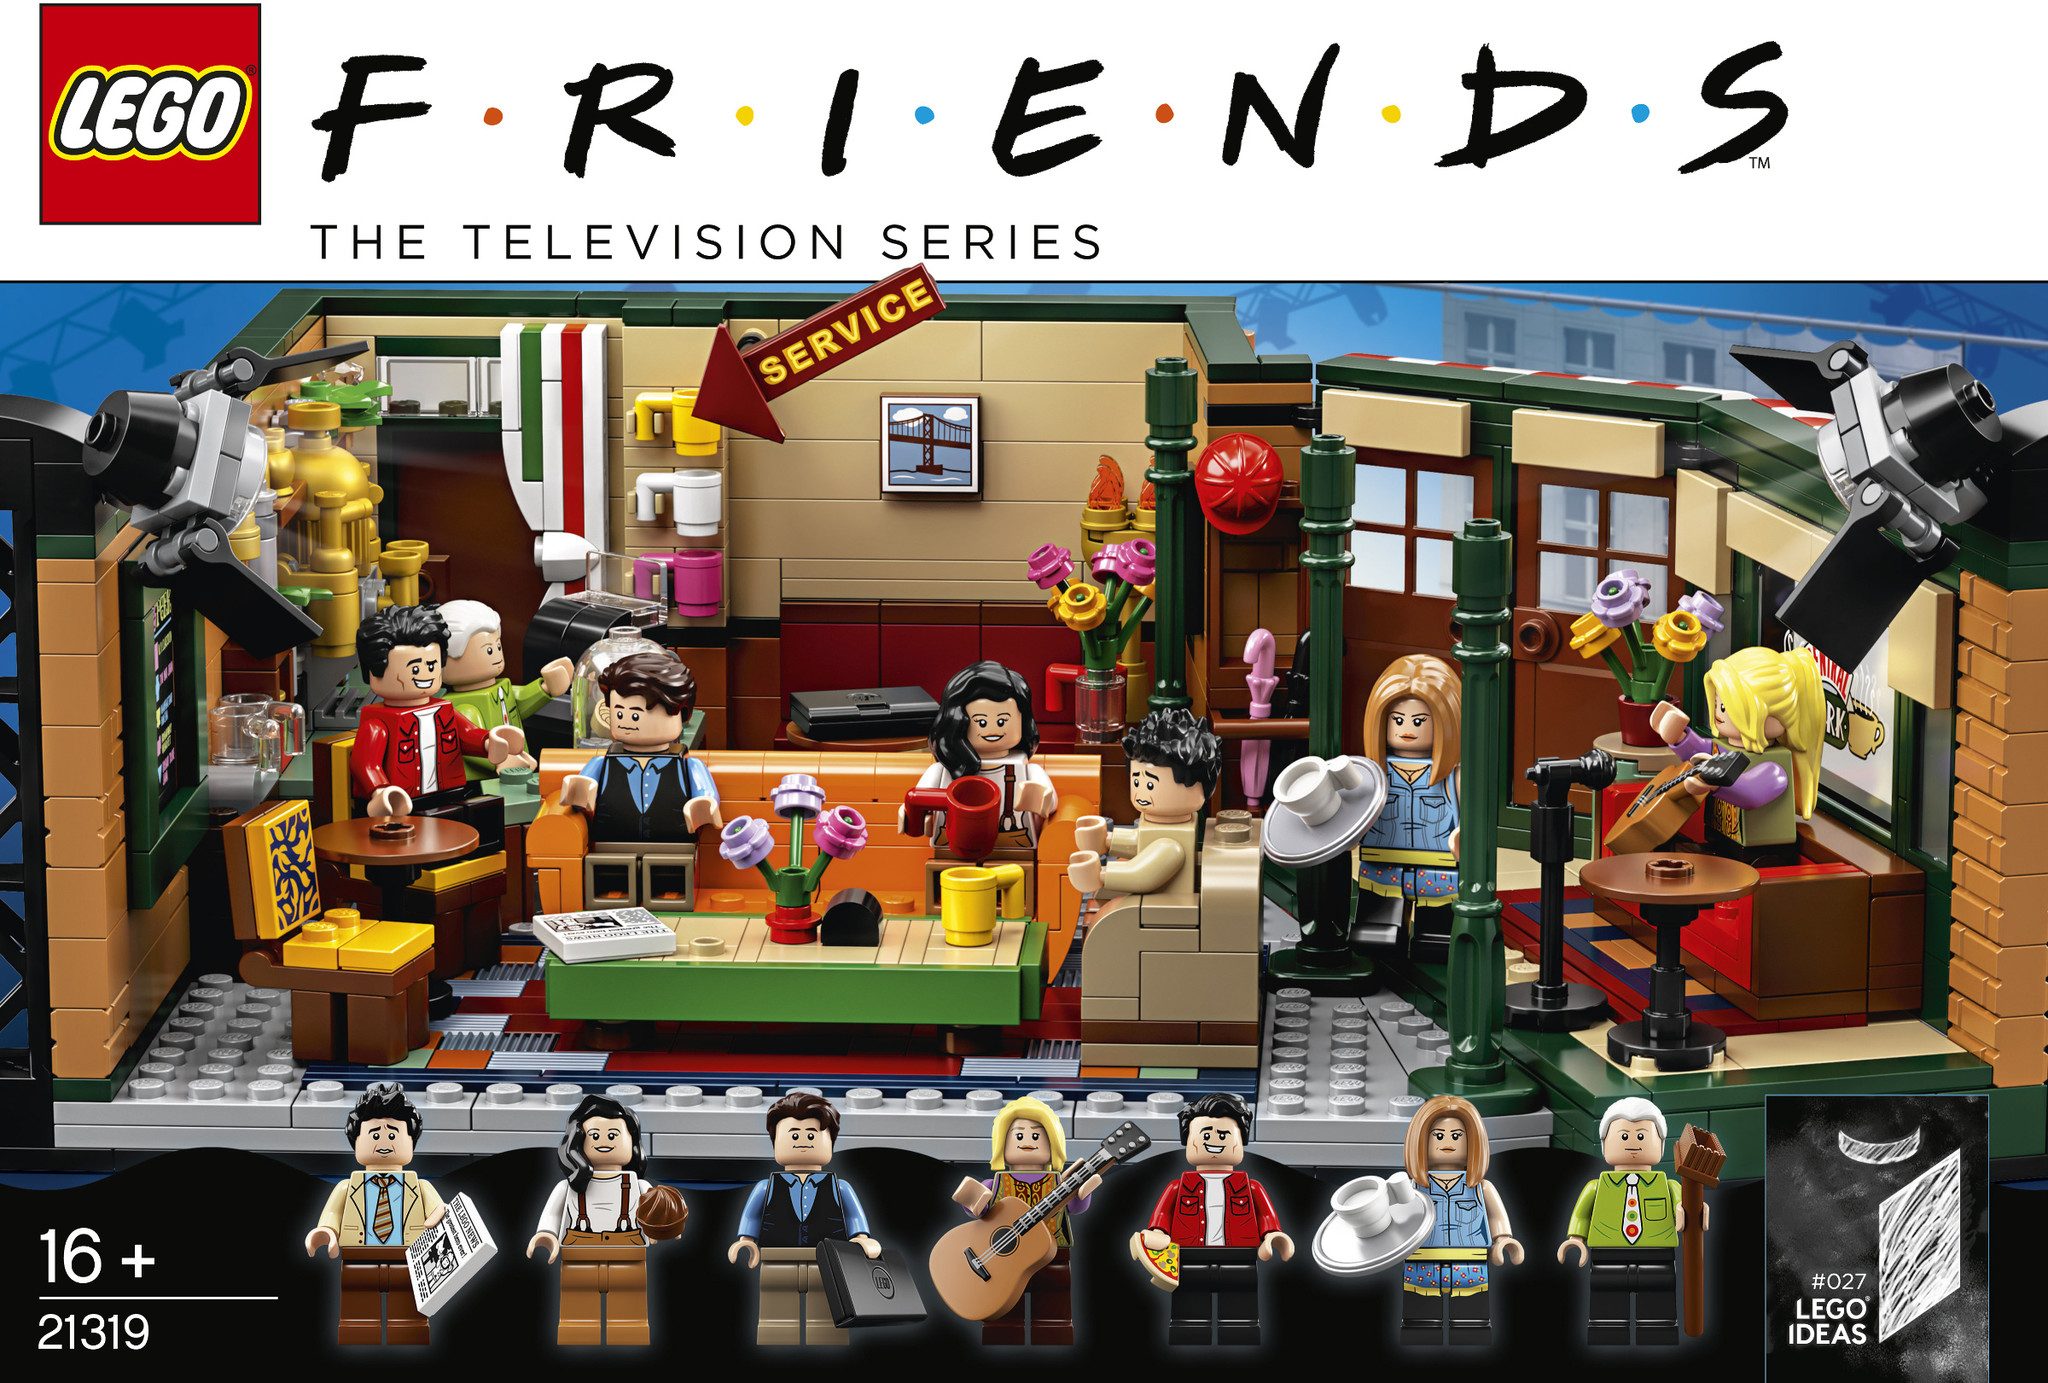 CENTRAL PERK (FRIENDS) - TOY STORE